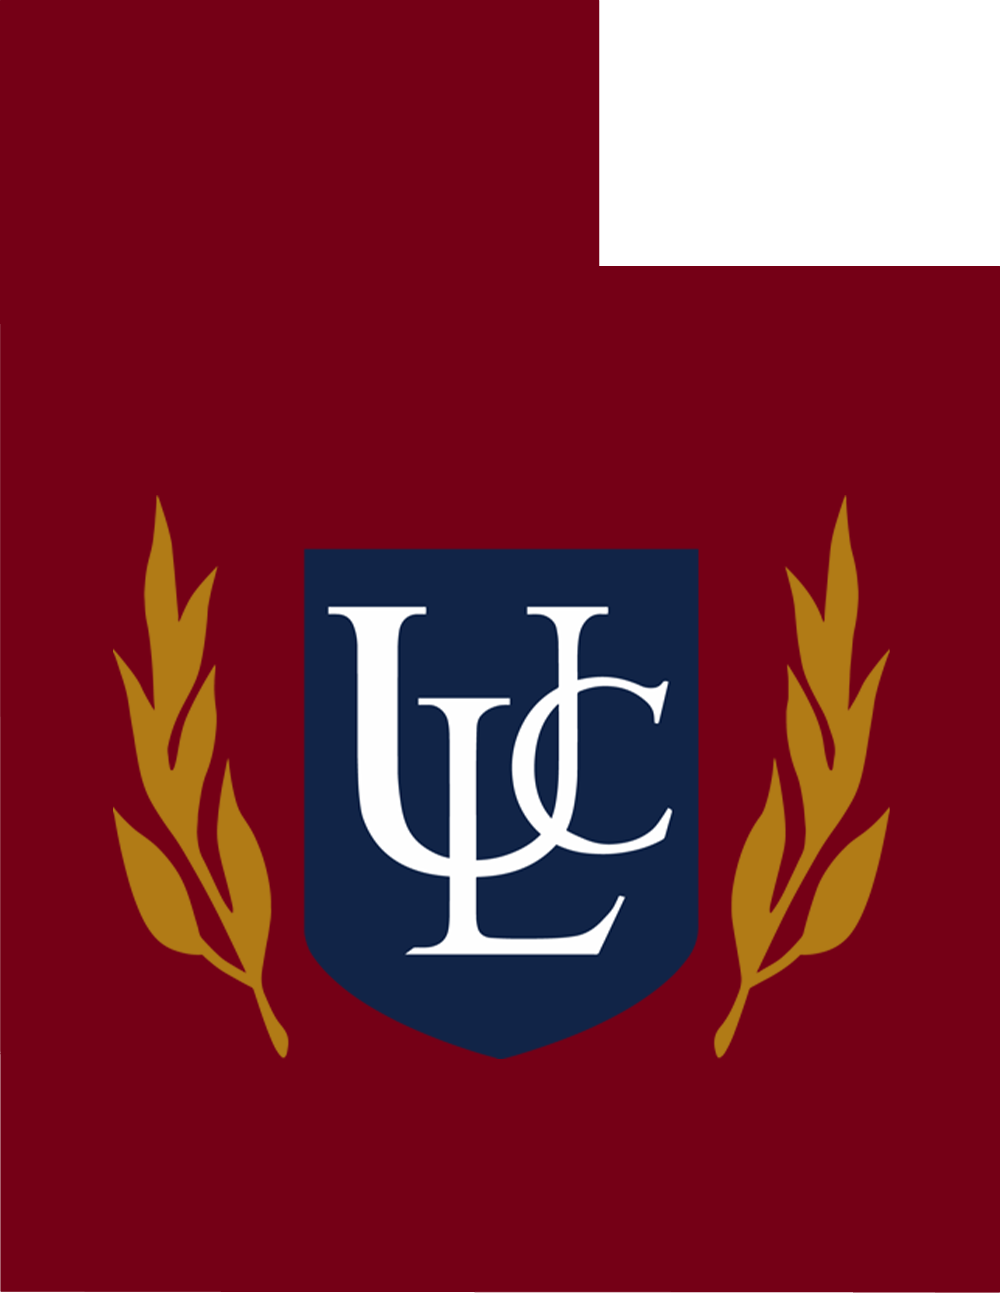 An outline of Utah with the ULC logo